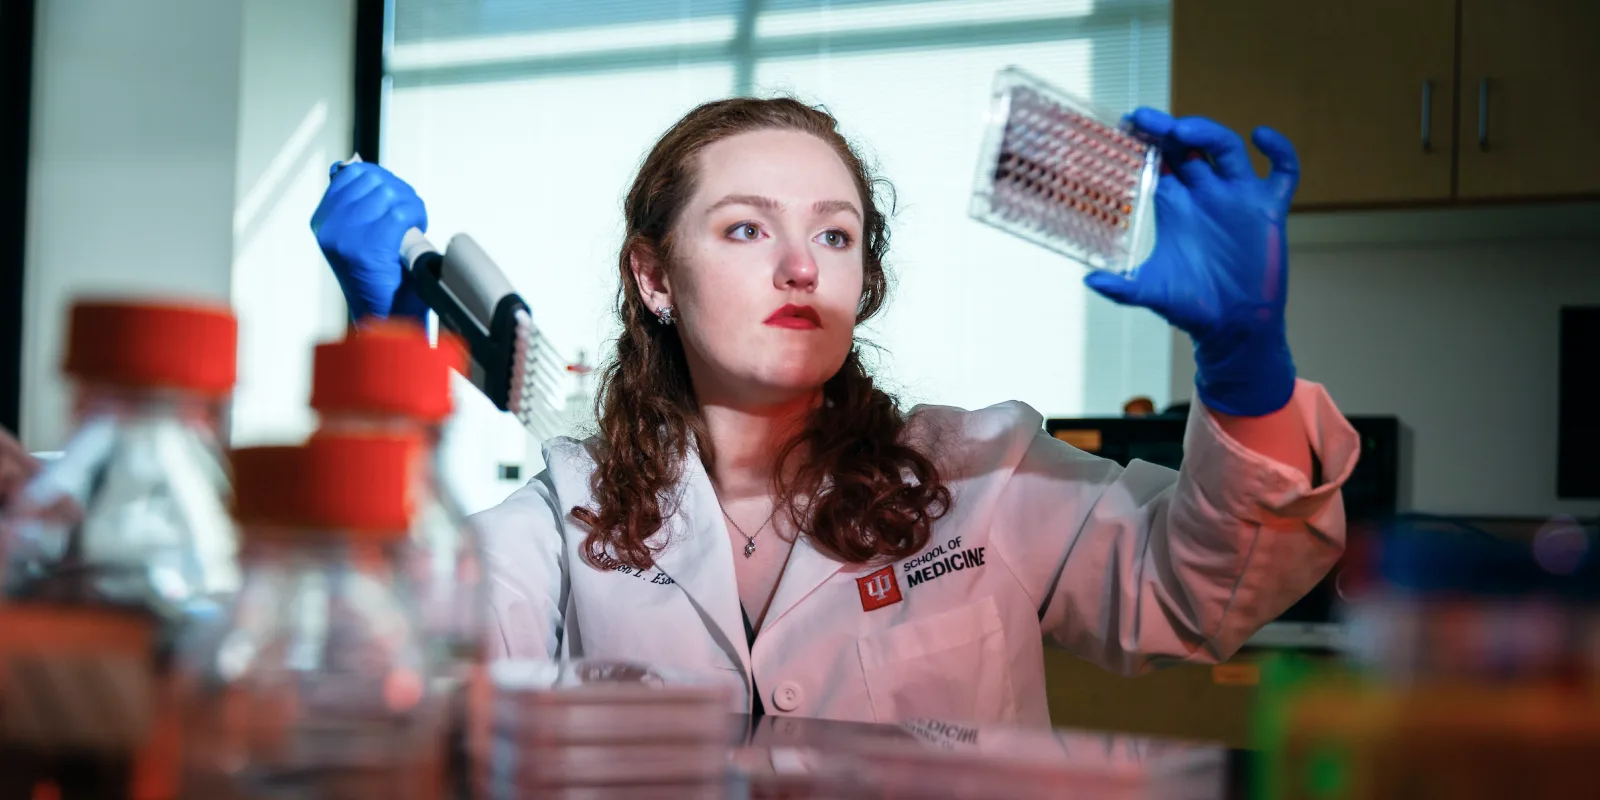 A female student in a lab coat with “IU School of Medicine” logo, wearing blue gloves, examines a lab sample while surrounded by lab equipment and bottles.